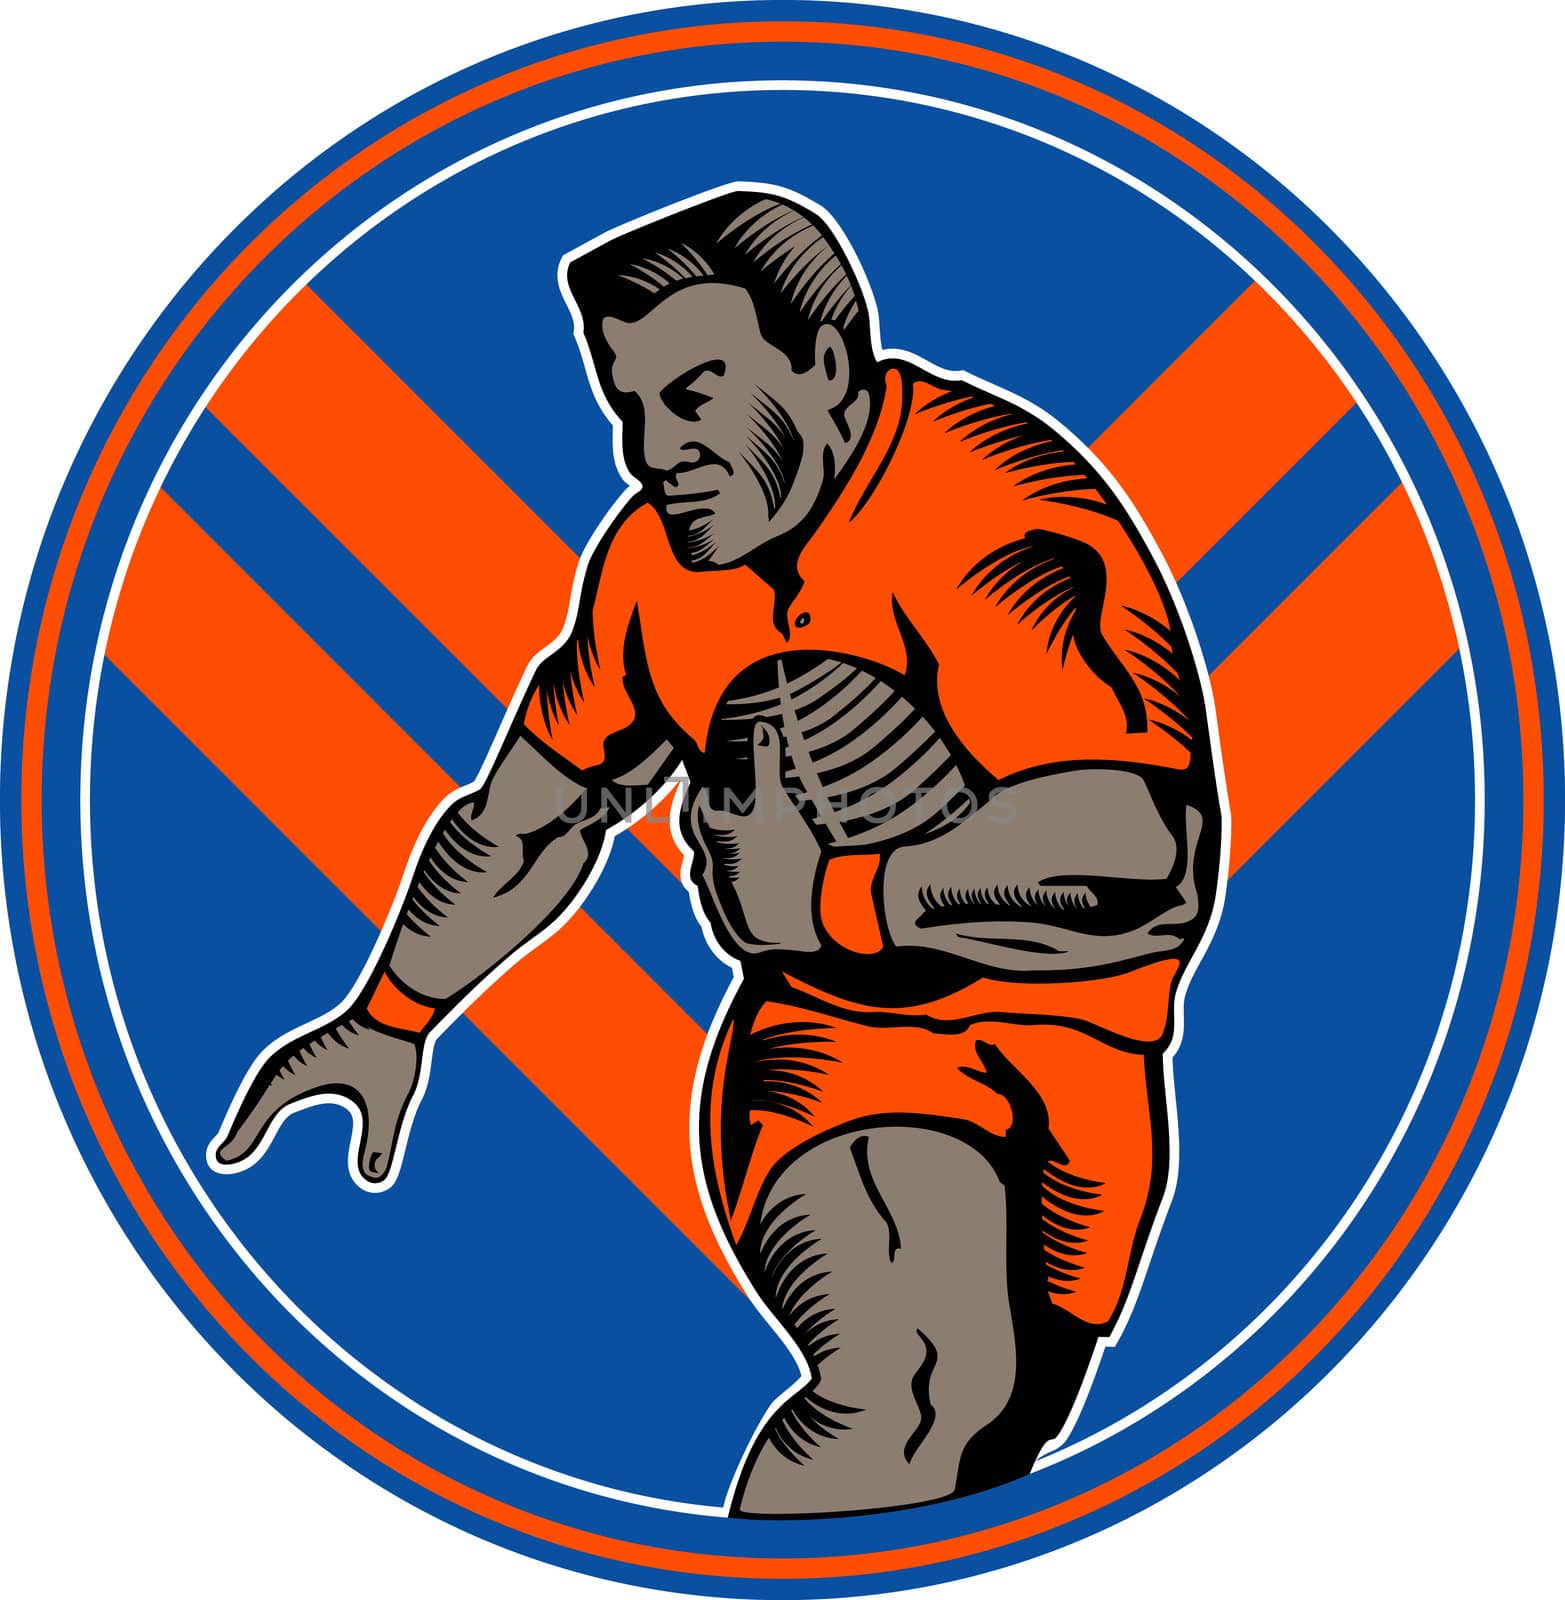 illustration of a Rugby player running with ball set inside oval with chevron in background set in circle done in woodcut style